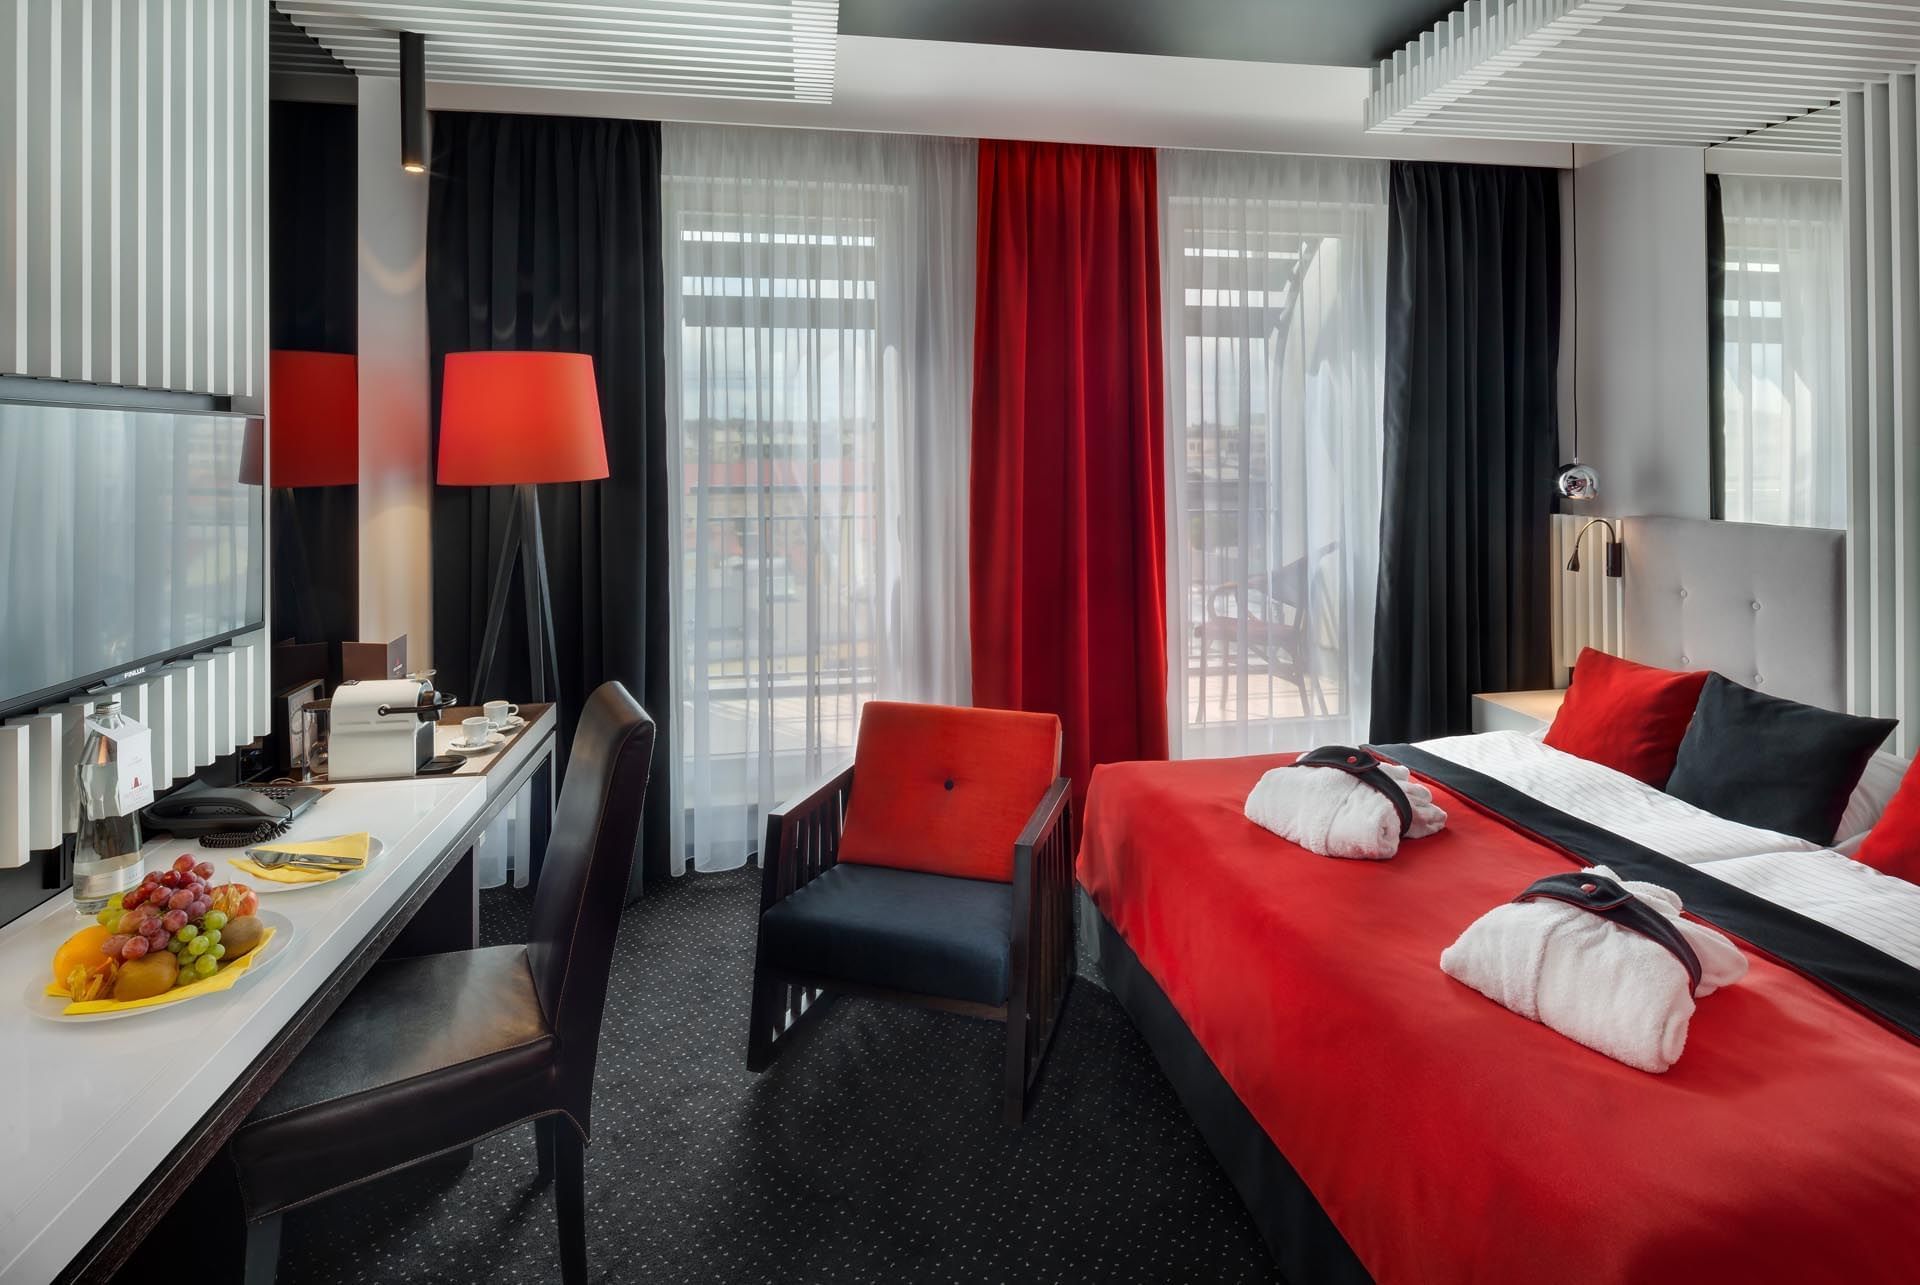 Superior Room with Balcony at Hotel Clement Prague